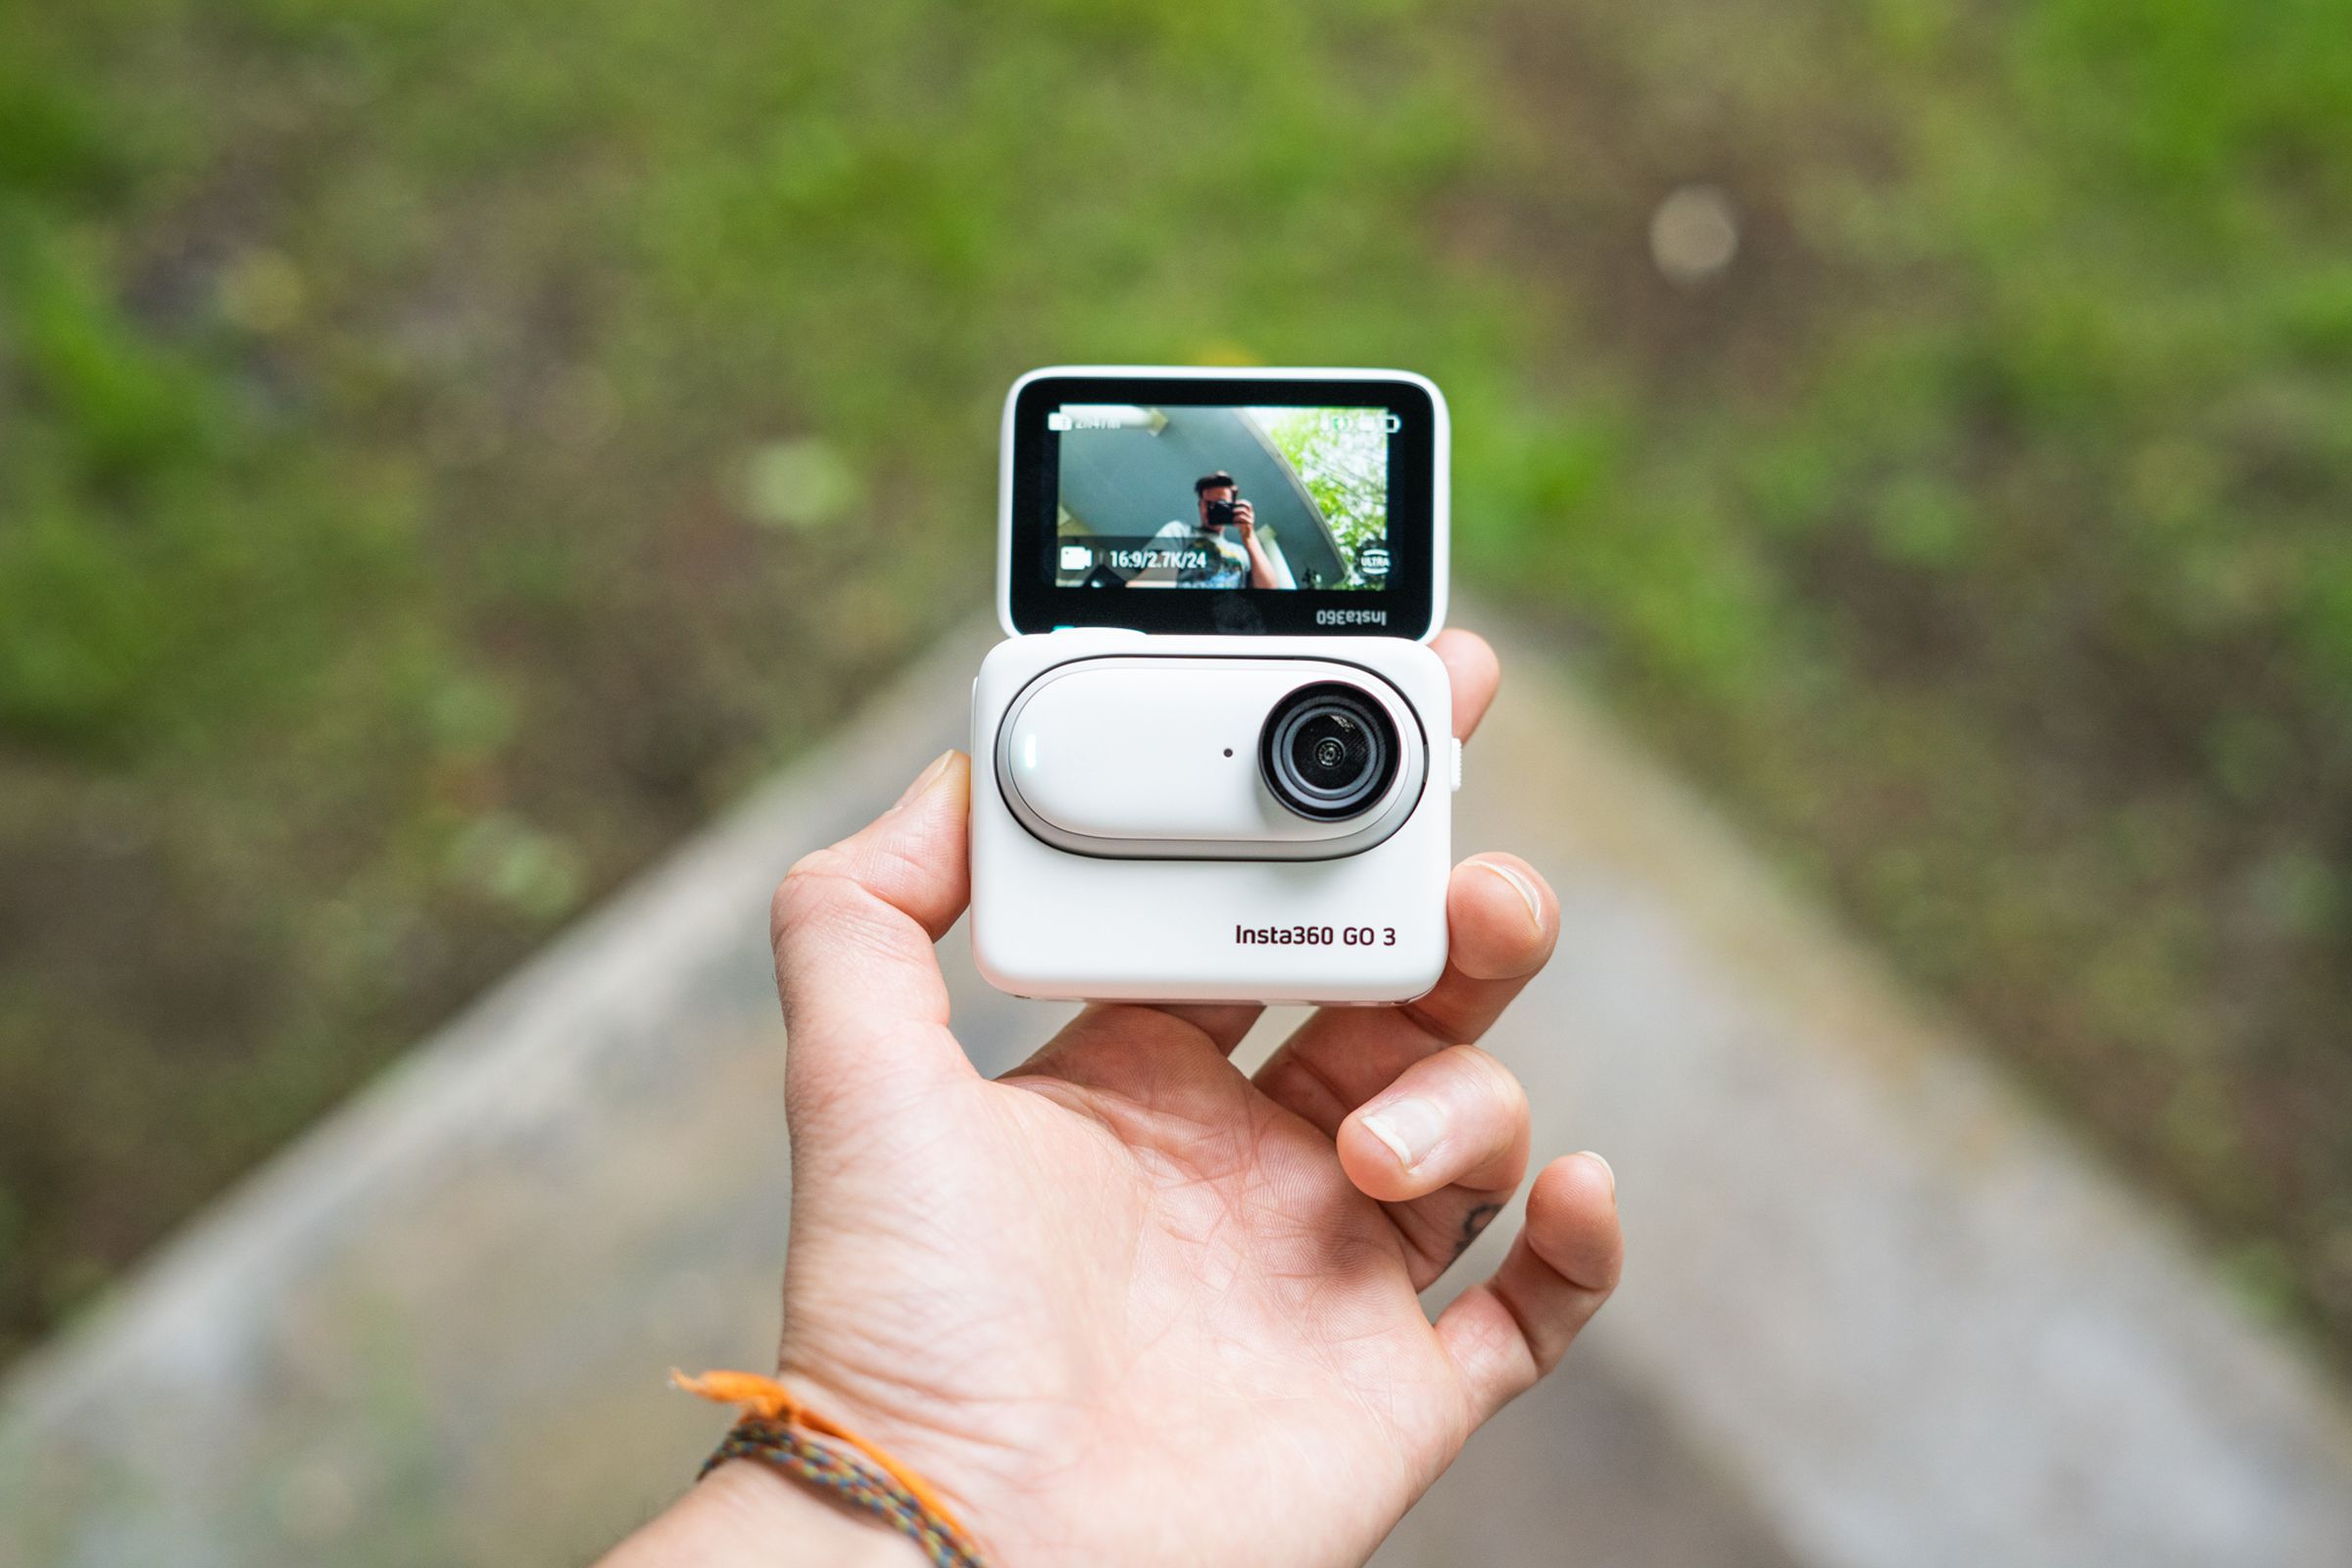 Insta360's Go 3 is a tiny camera for vlogging or putting on your